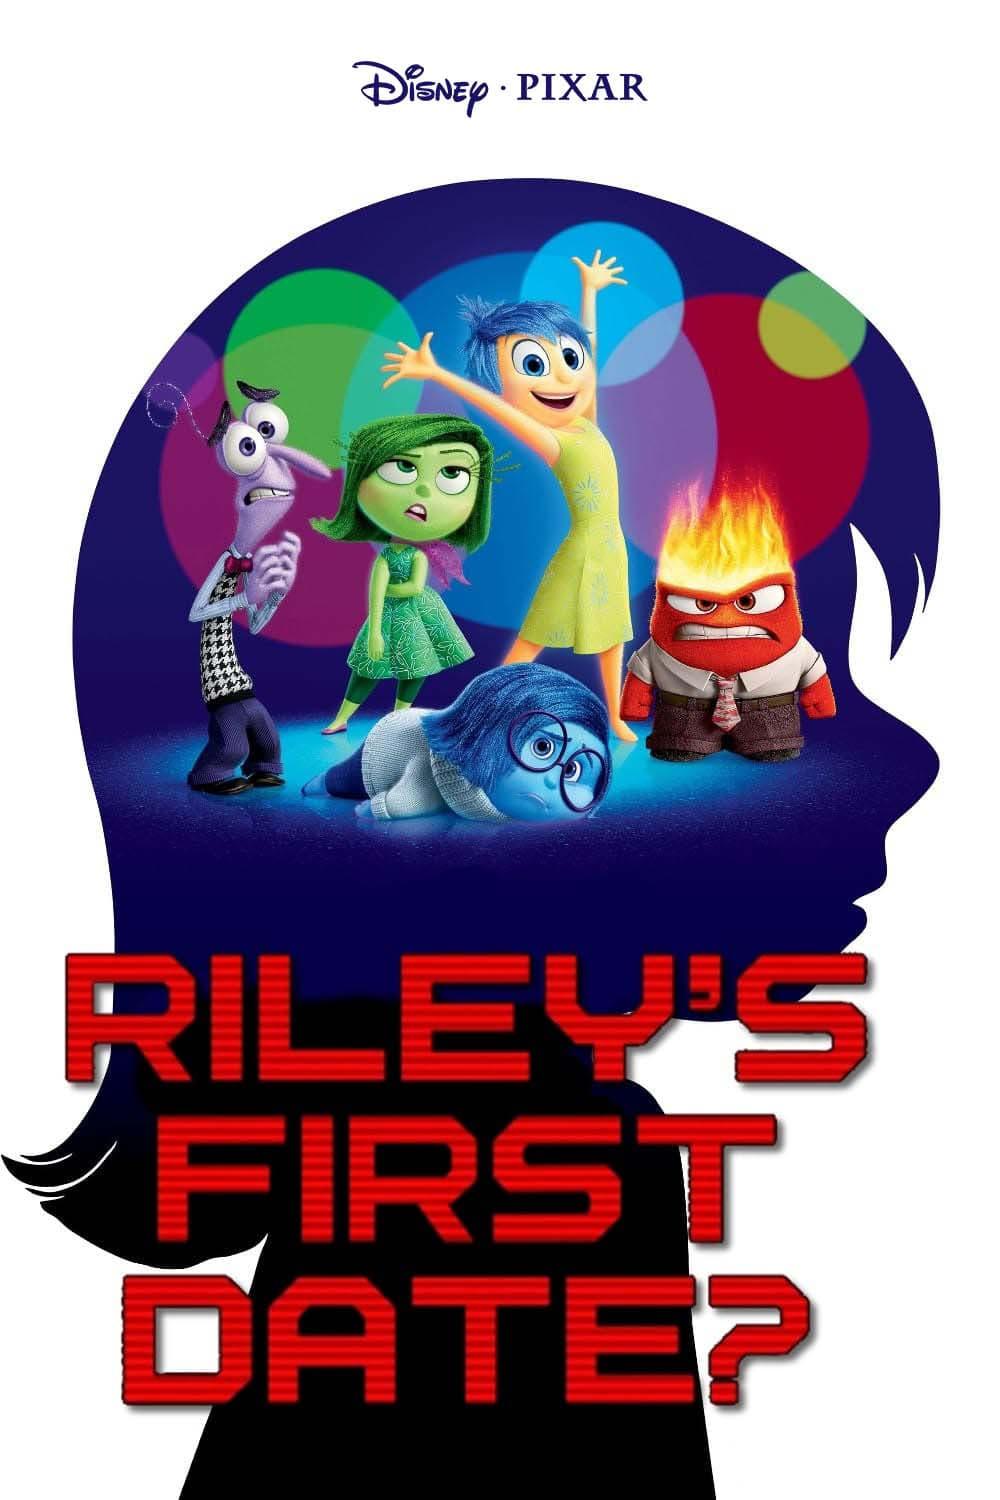 Riley's First Date? poster